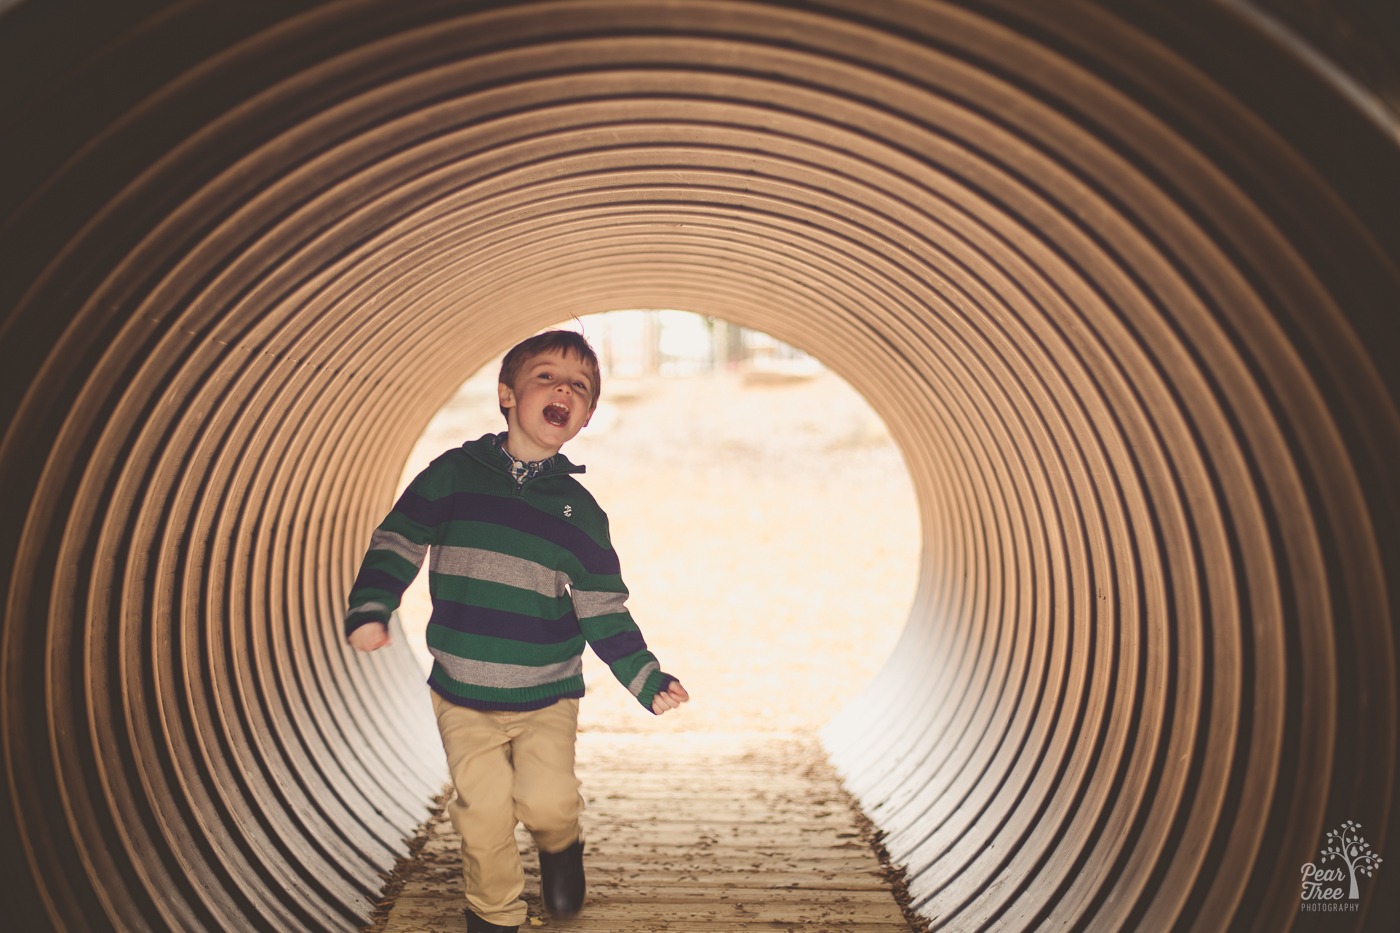 Little boy running through a tunnel having fun with his mouth wide open